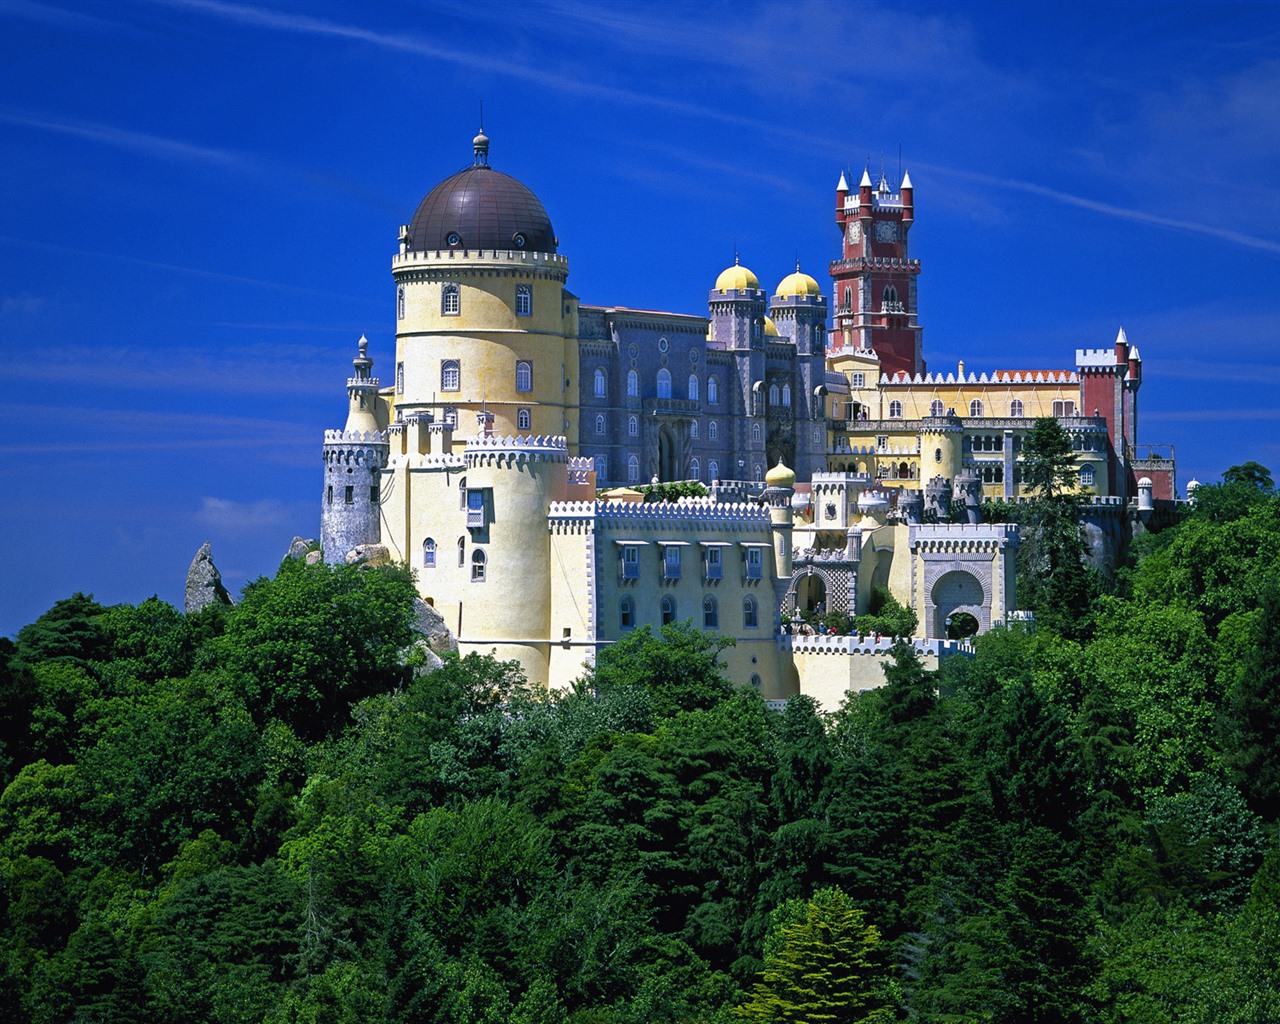 Windows 7 Wallpapers: Castles of Europe #13 - 1280x1024